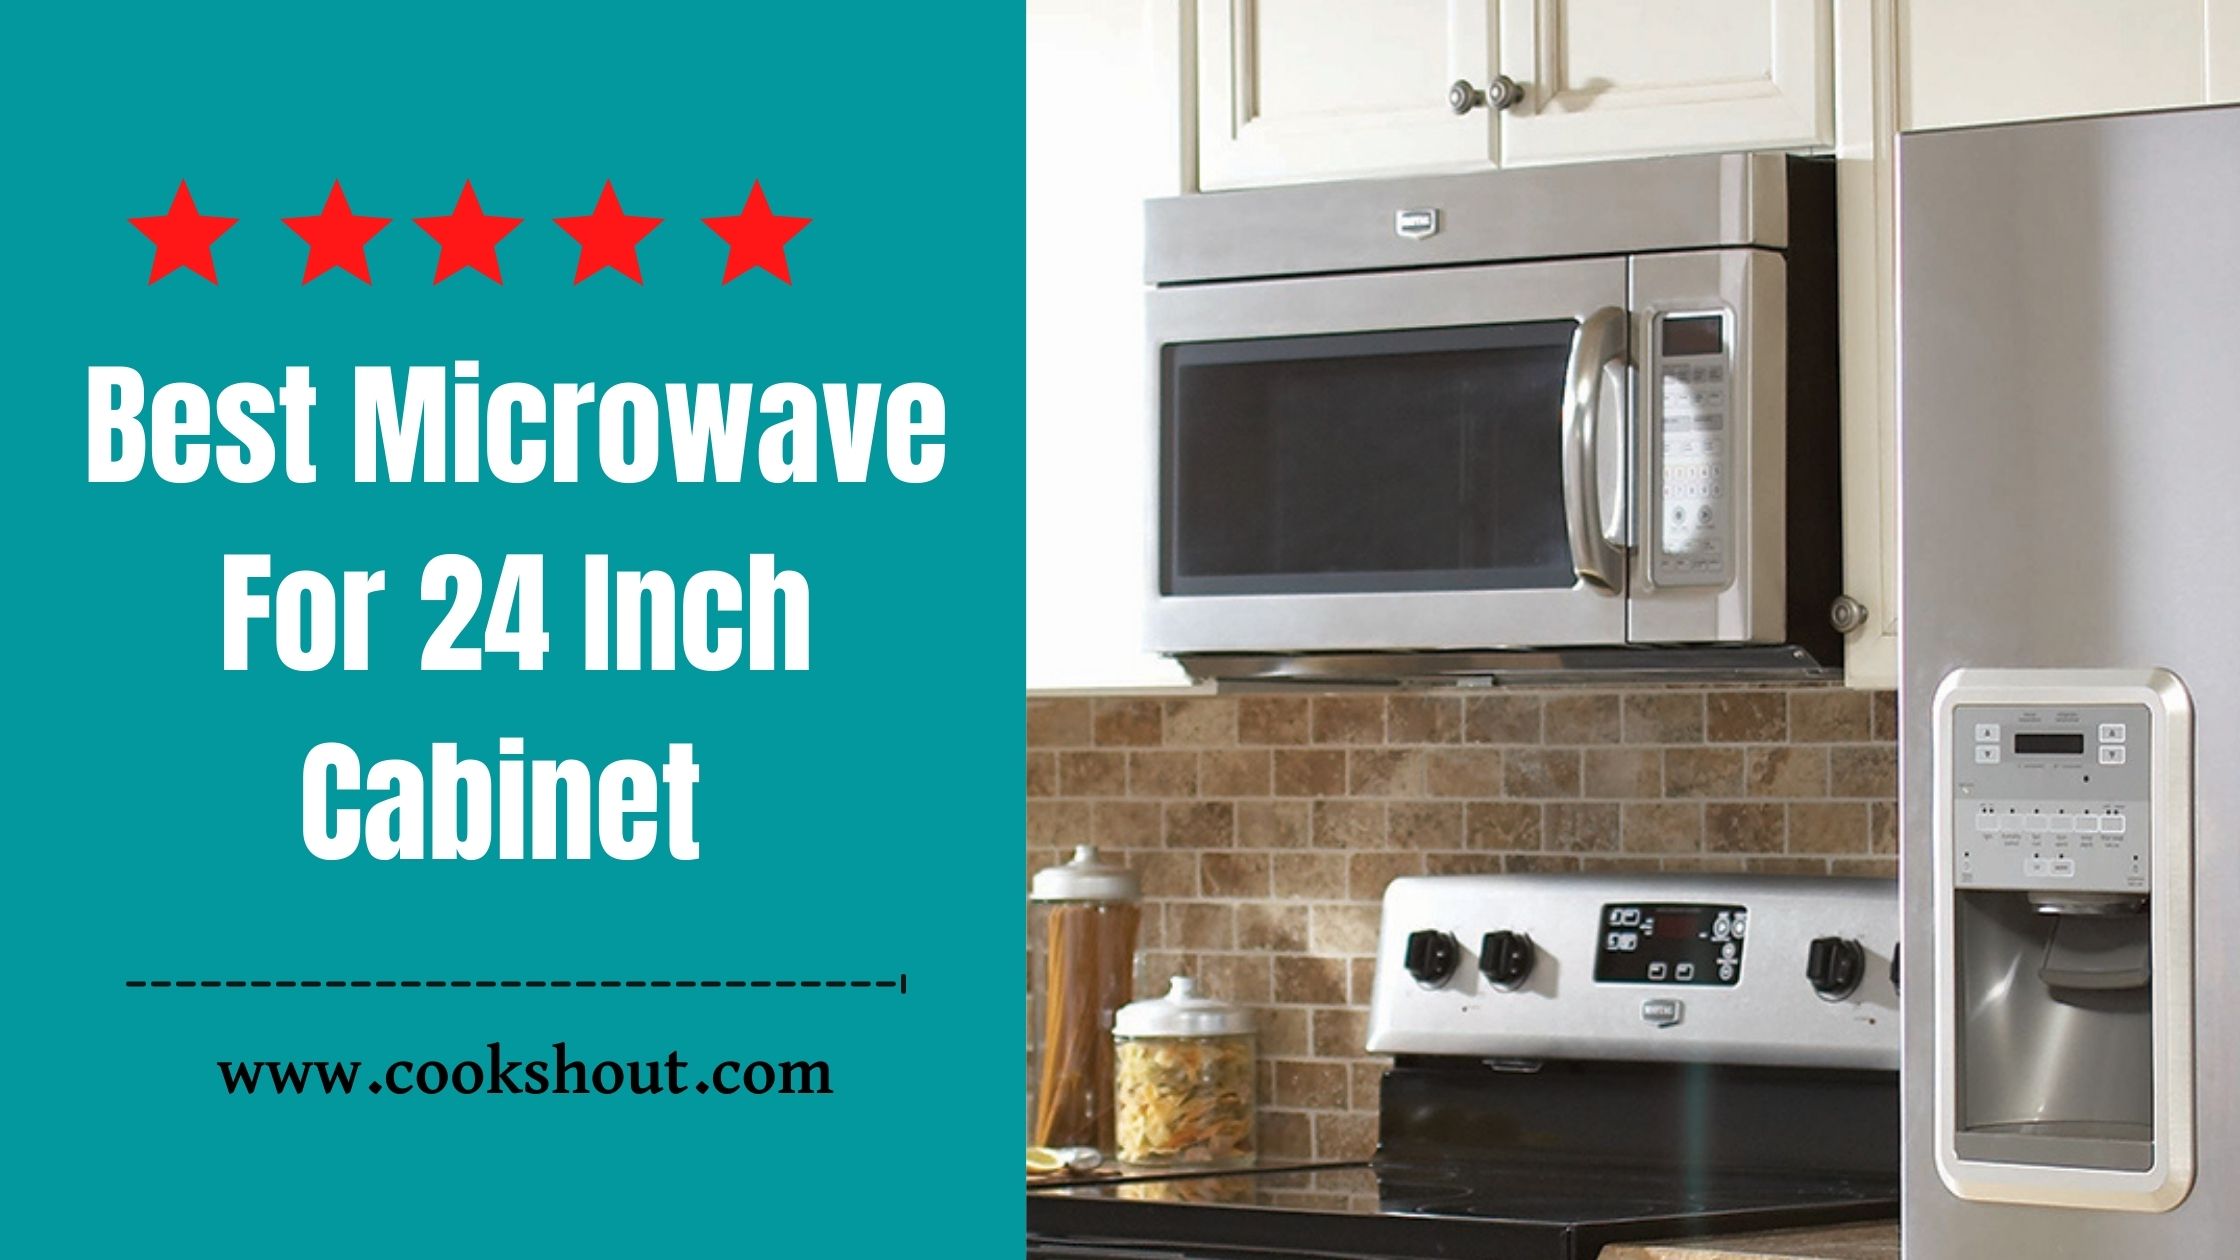 Best Microwave For 24 Inch Cabinet